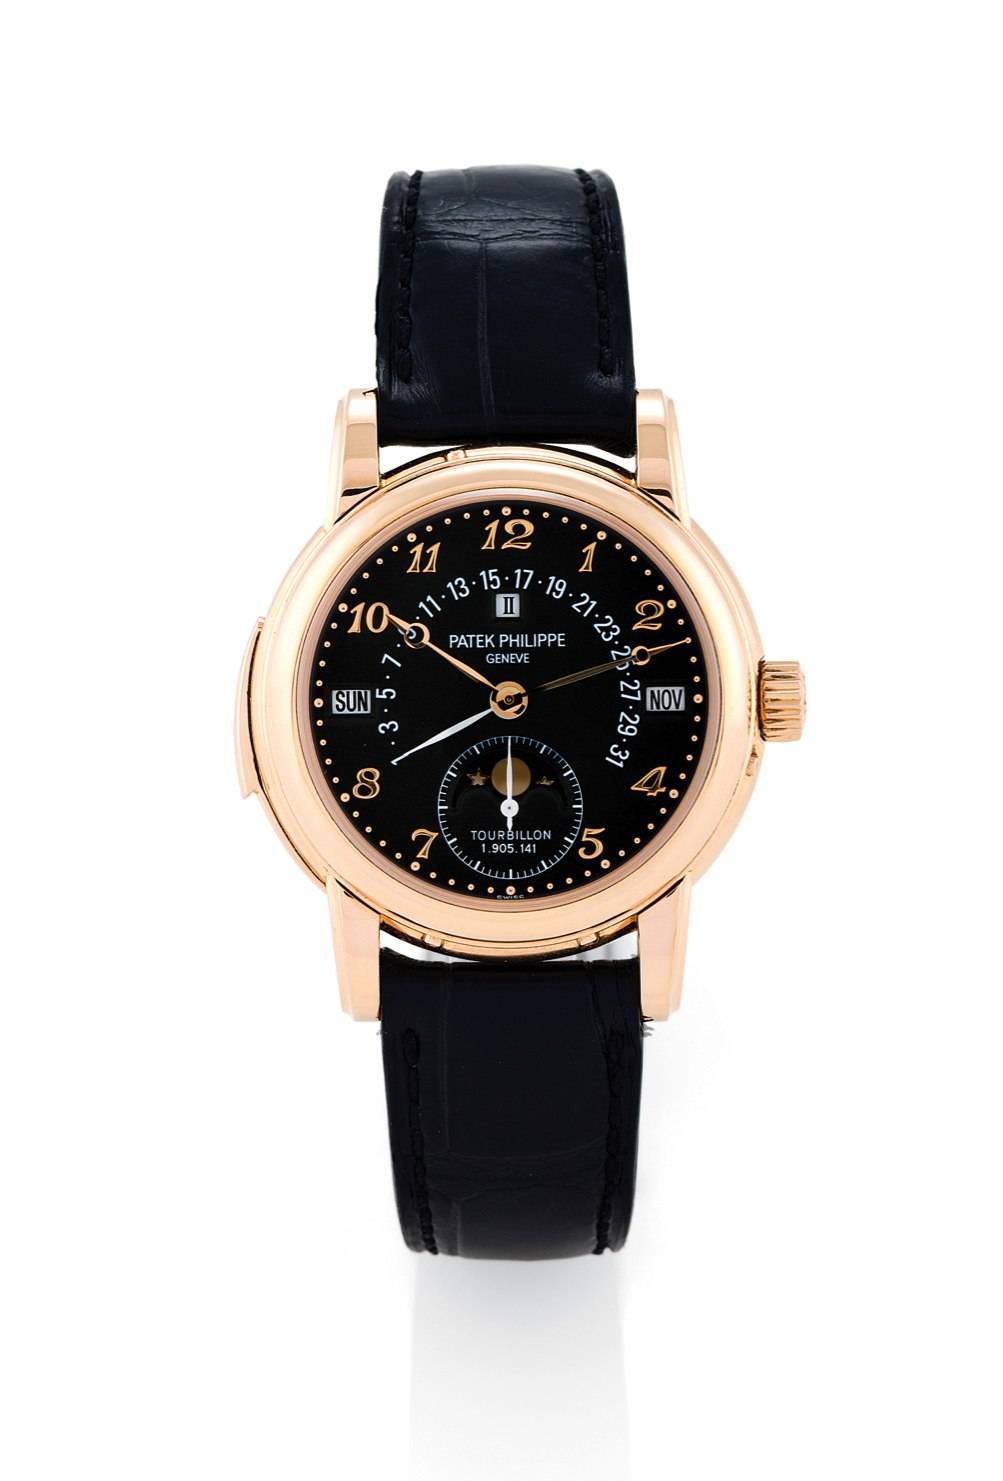 Patek Philippe Ref. 5016 in Pink Gold Sets Record at Antiquorum Auction